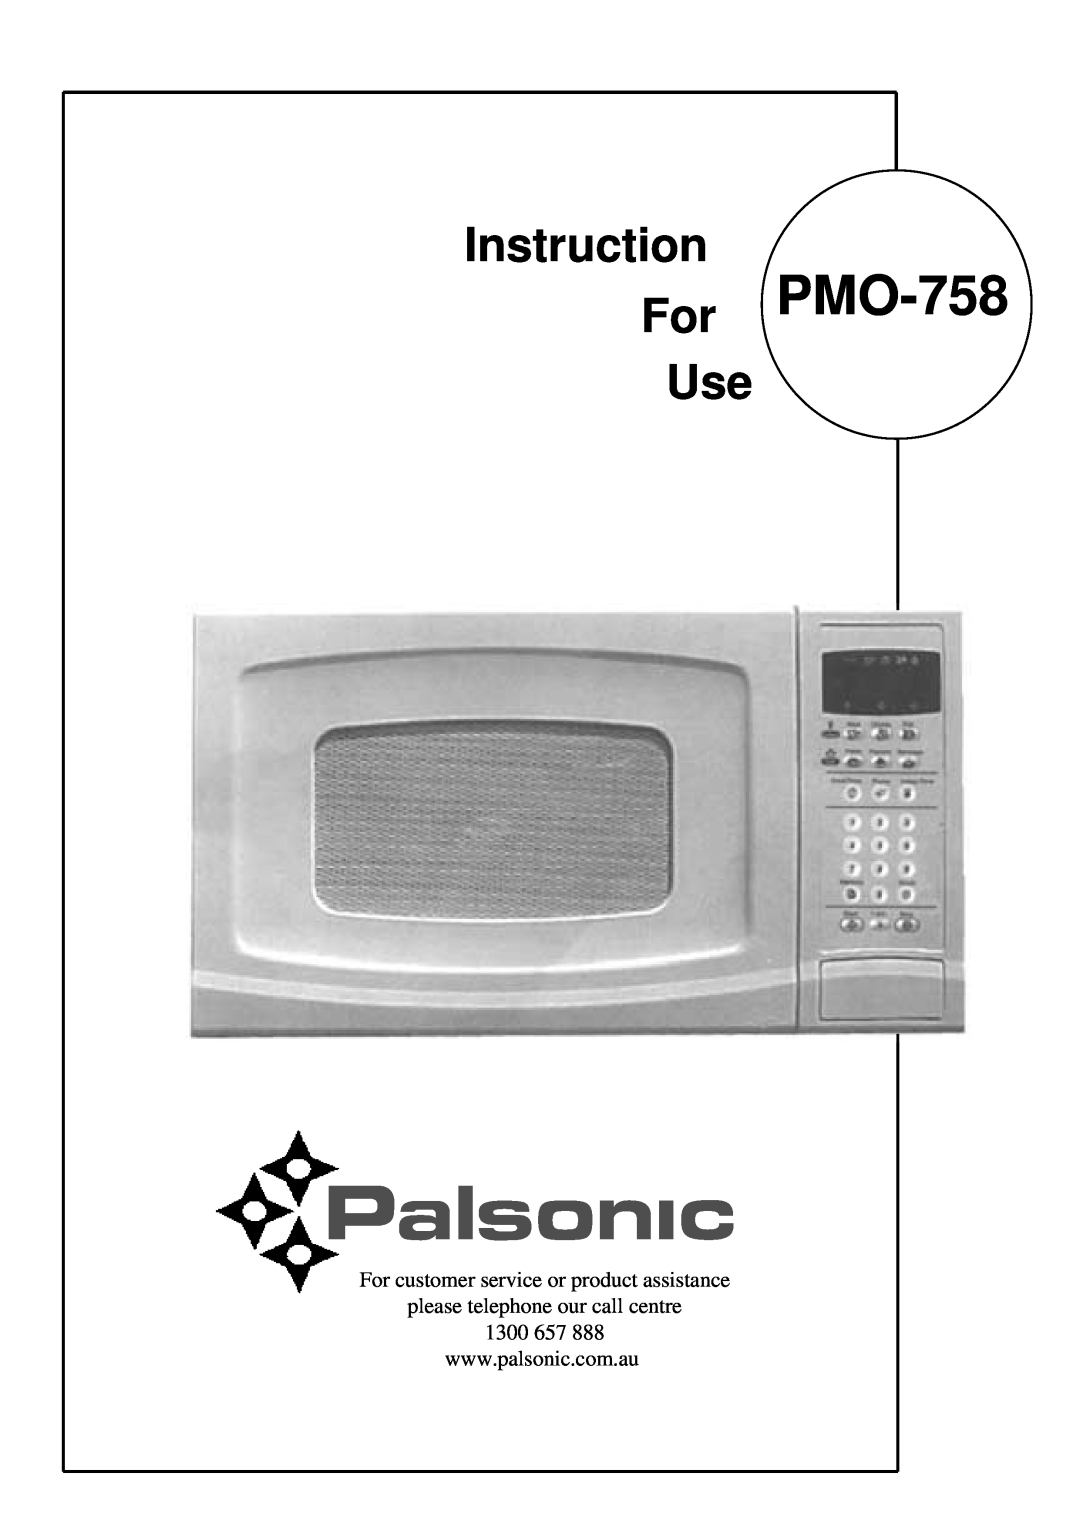 Palsonic manual For PMO-758, Instruction, For customer service or product assistance, please telephone our call centre 